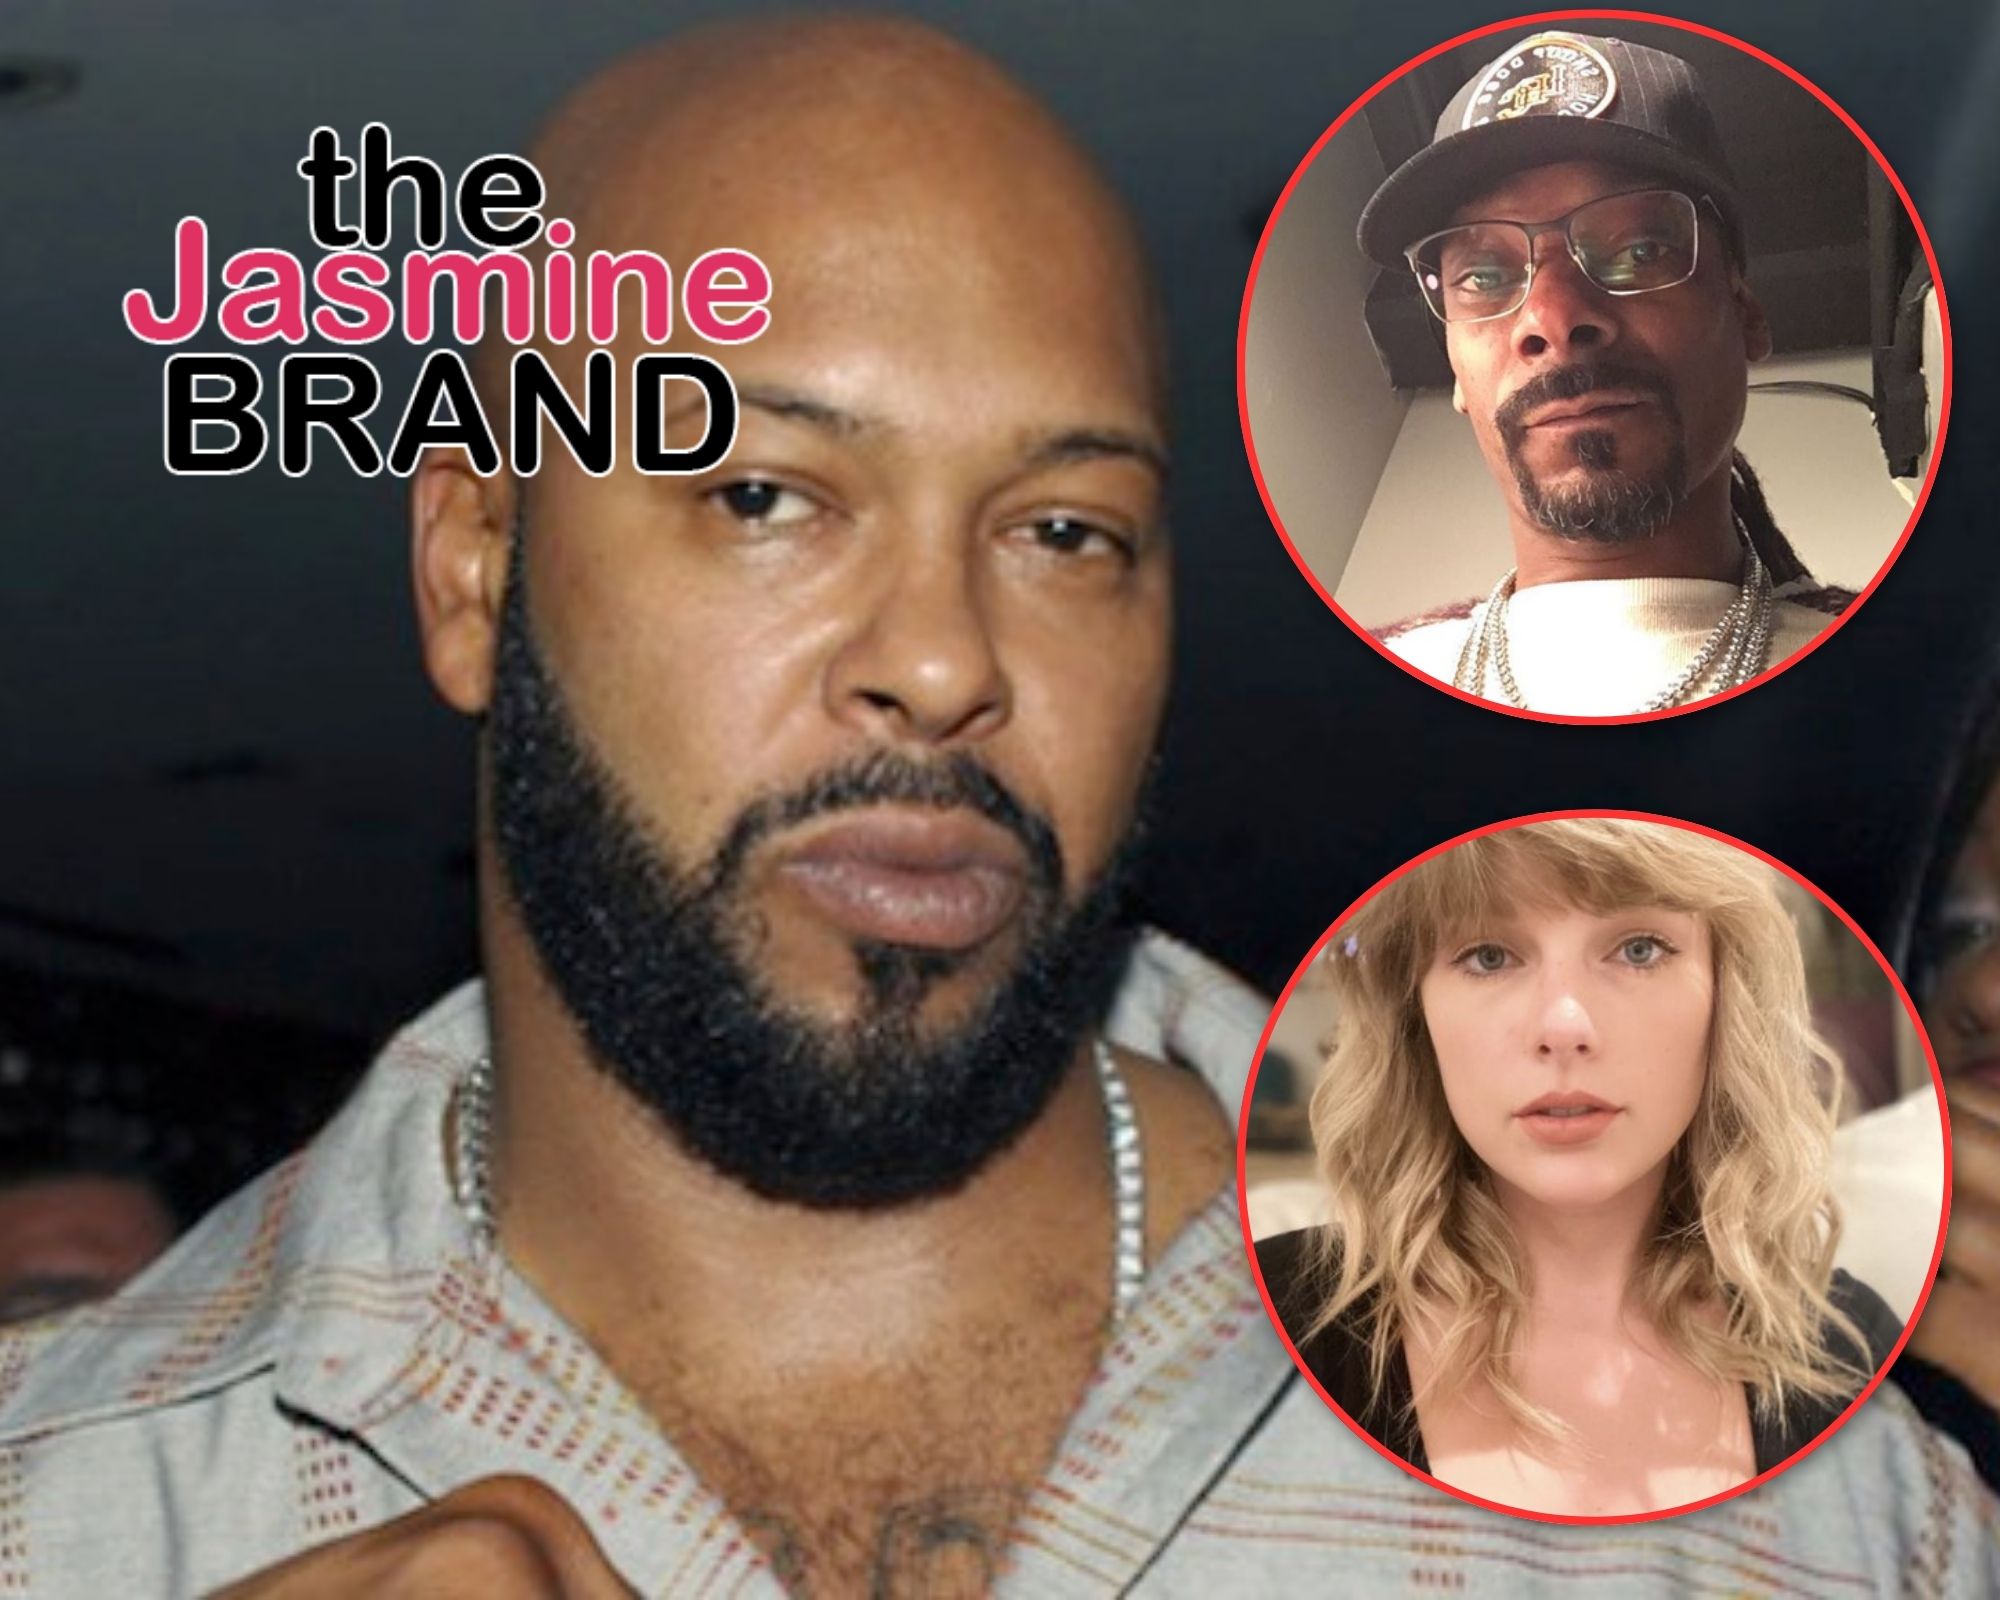 Suge Knight Claims A Social Media Hacker Is Behind Shady Posts Targeting Snoop Dogg, Praises Taylor Swift: 'That's One Smart, Powerful, Aggressive Woman'